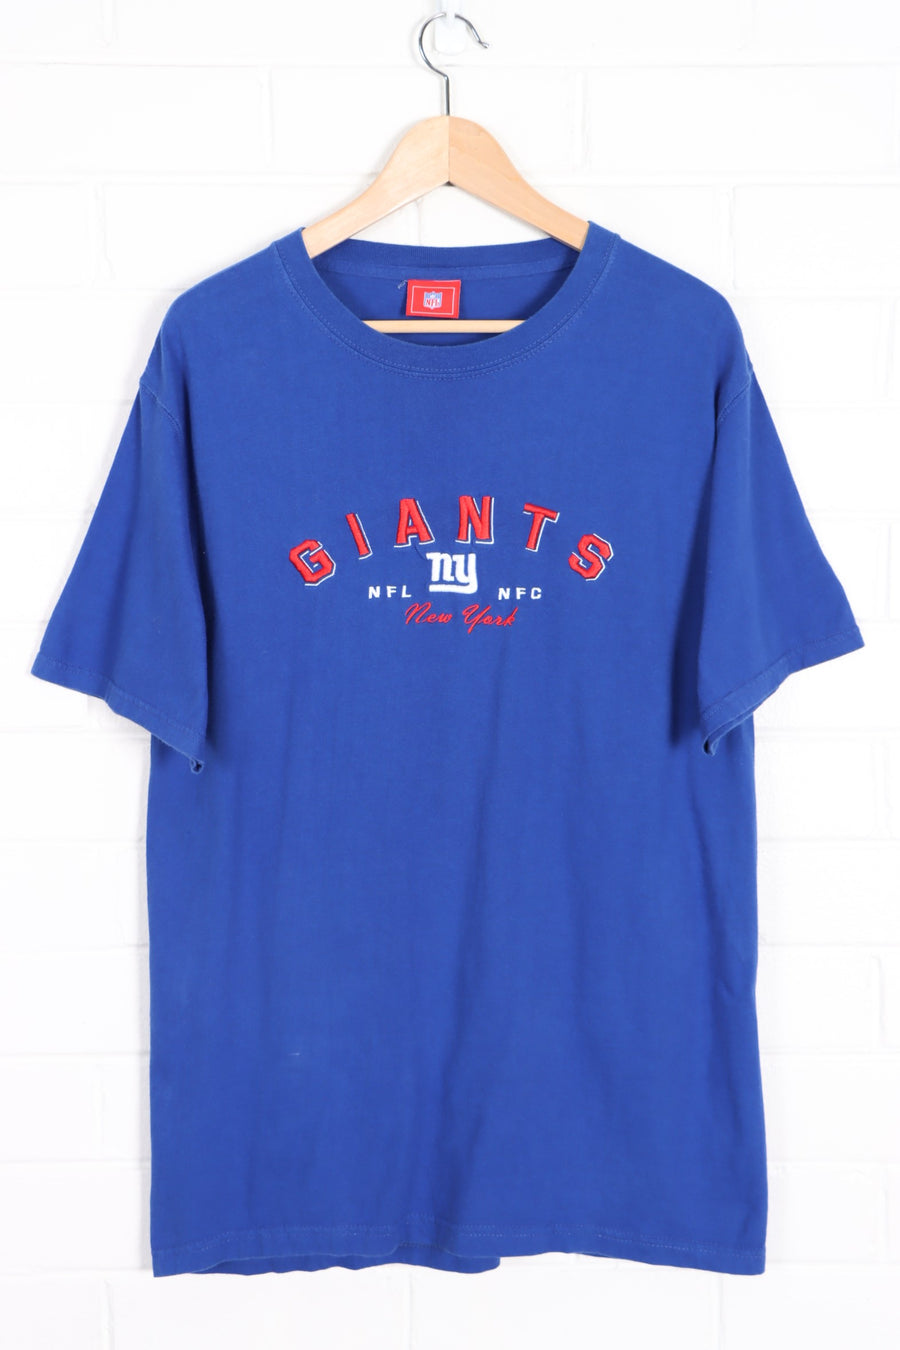 NFL NFC New York Giants Embroidered T-Shirt (M) - Vintage Sole Melbourne